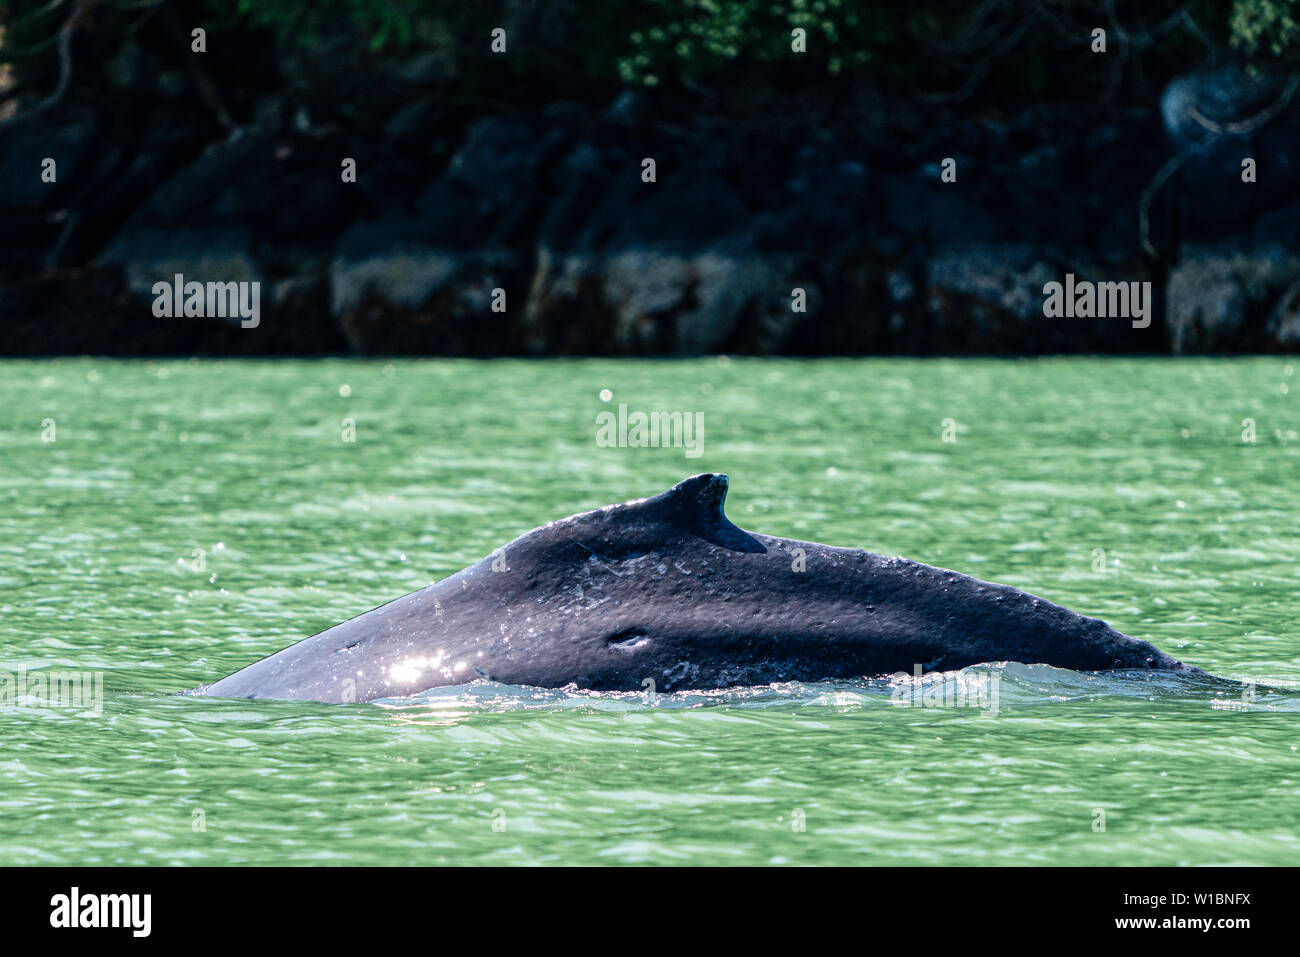 Humpback whale diving in the green glacier feed water of Knight Inlet, First Nations Territory, Great Bear Rainforest, British Columbia, Canada. Stock Photo